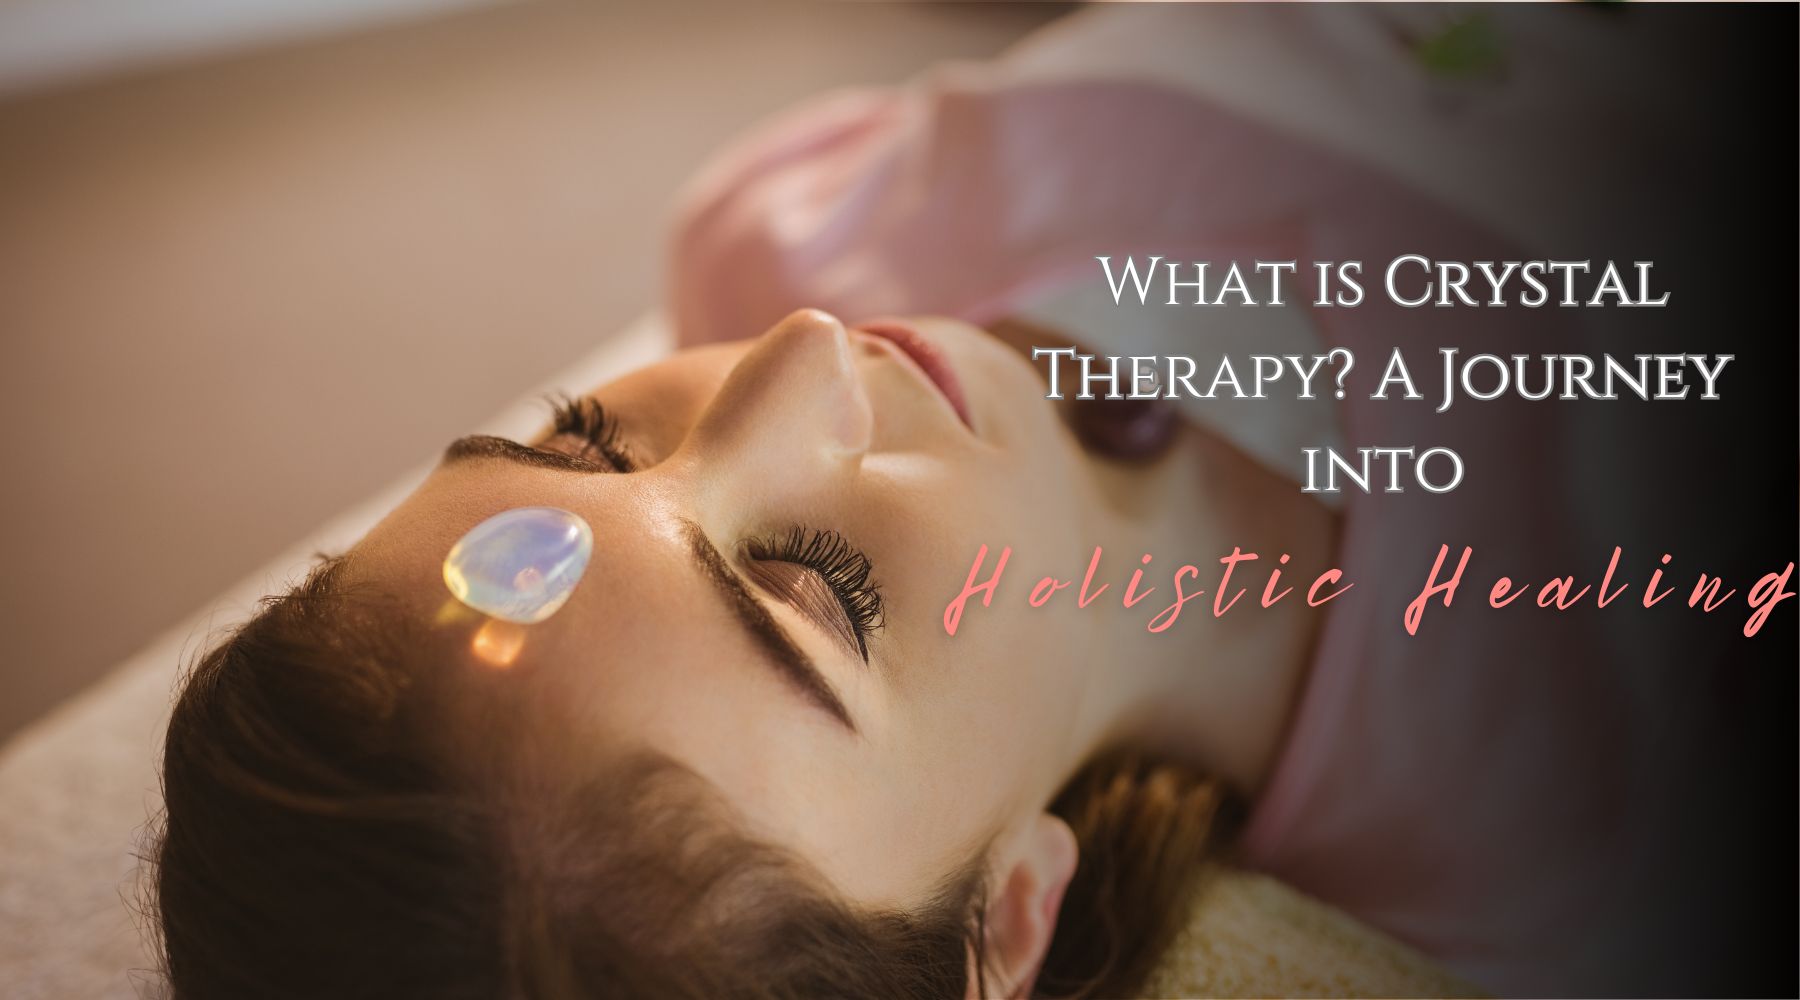 What is Crystal Therapy? A Journey into Holistic Healing